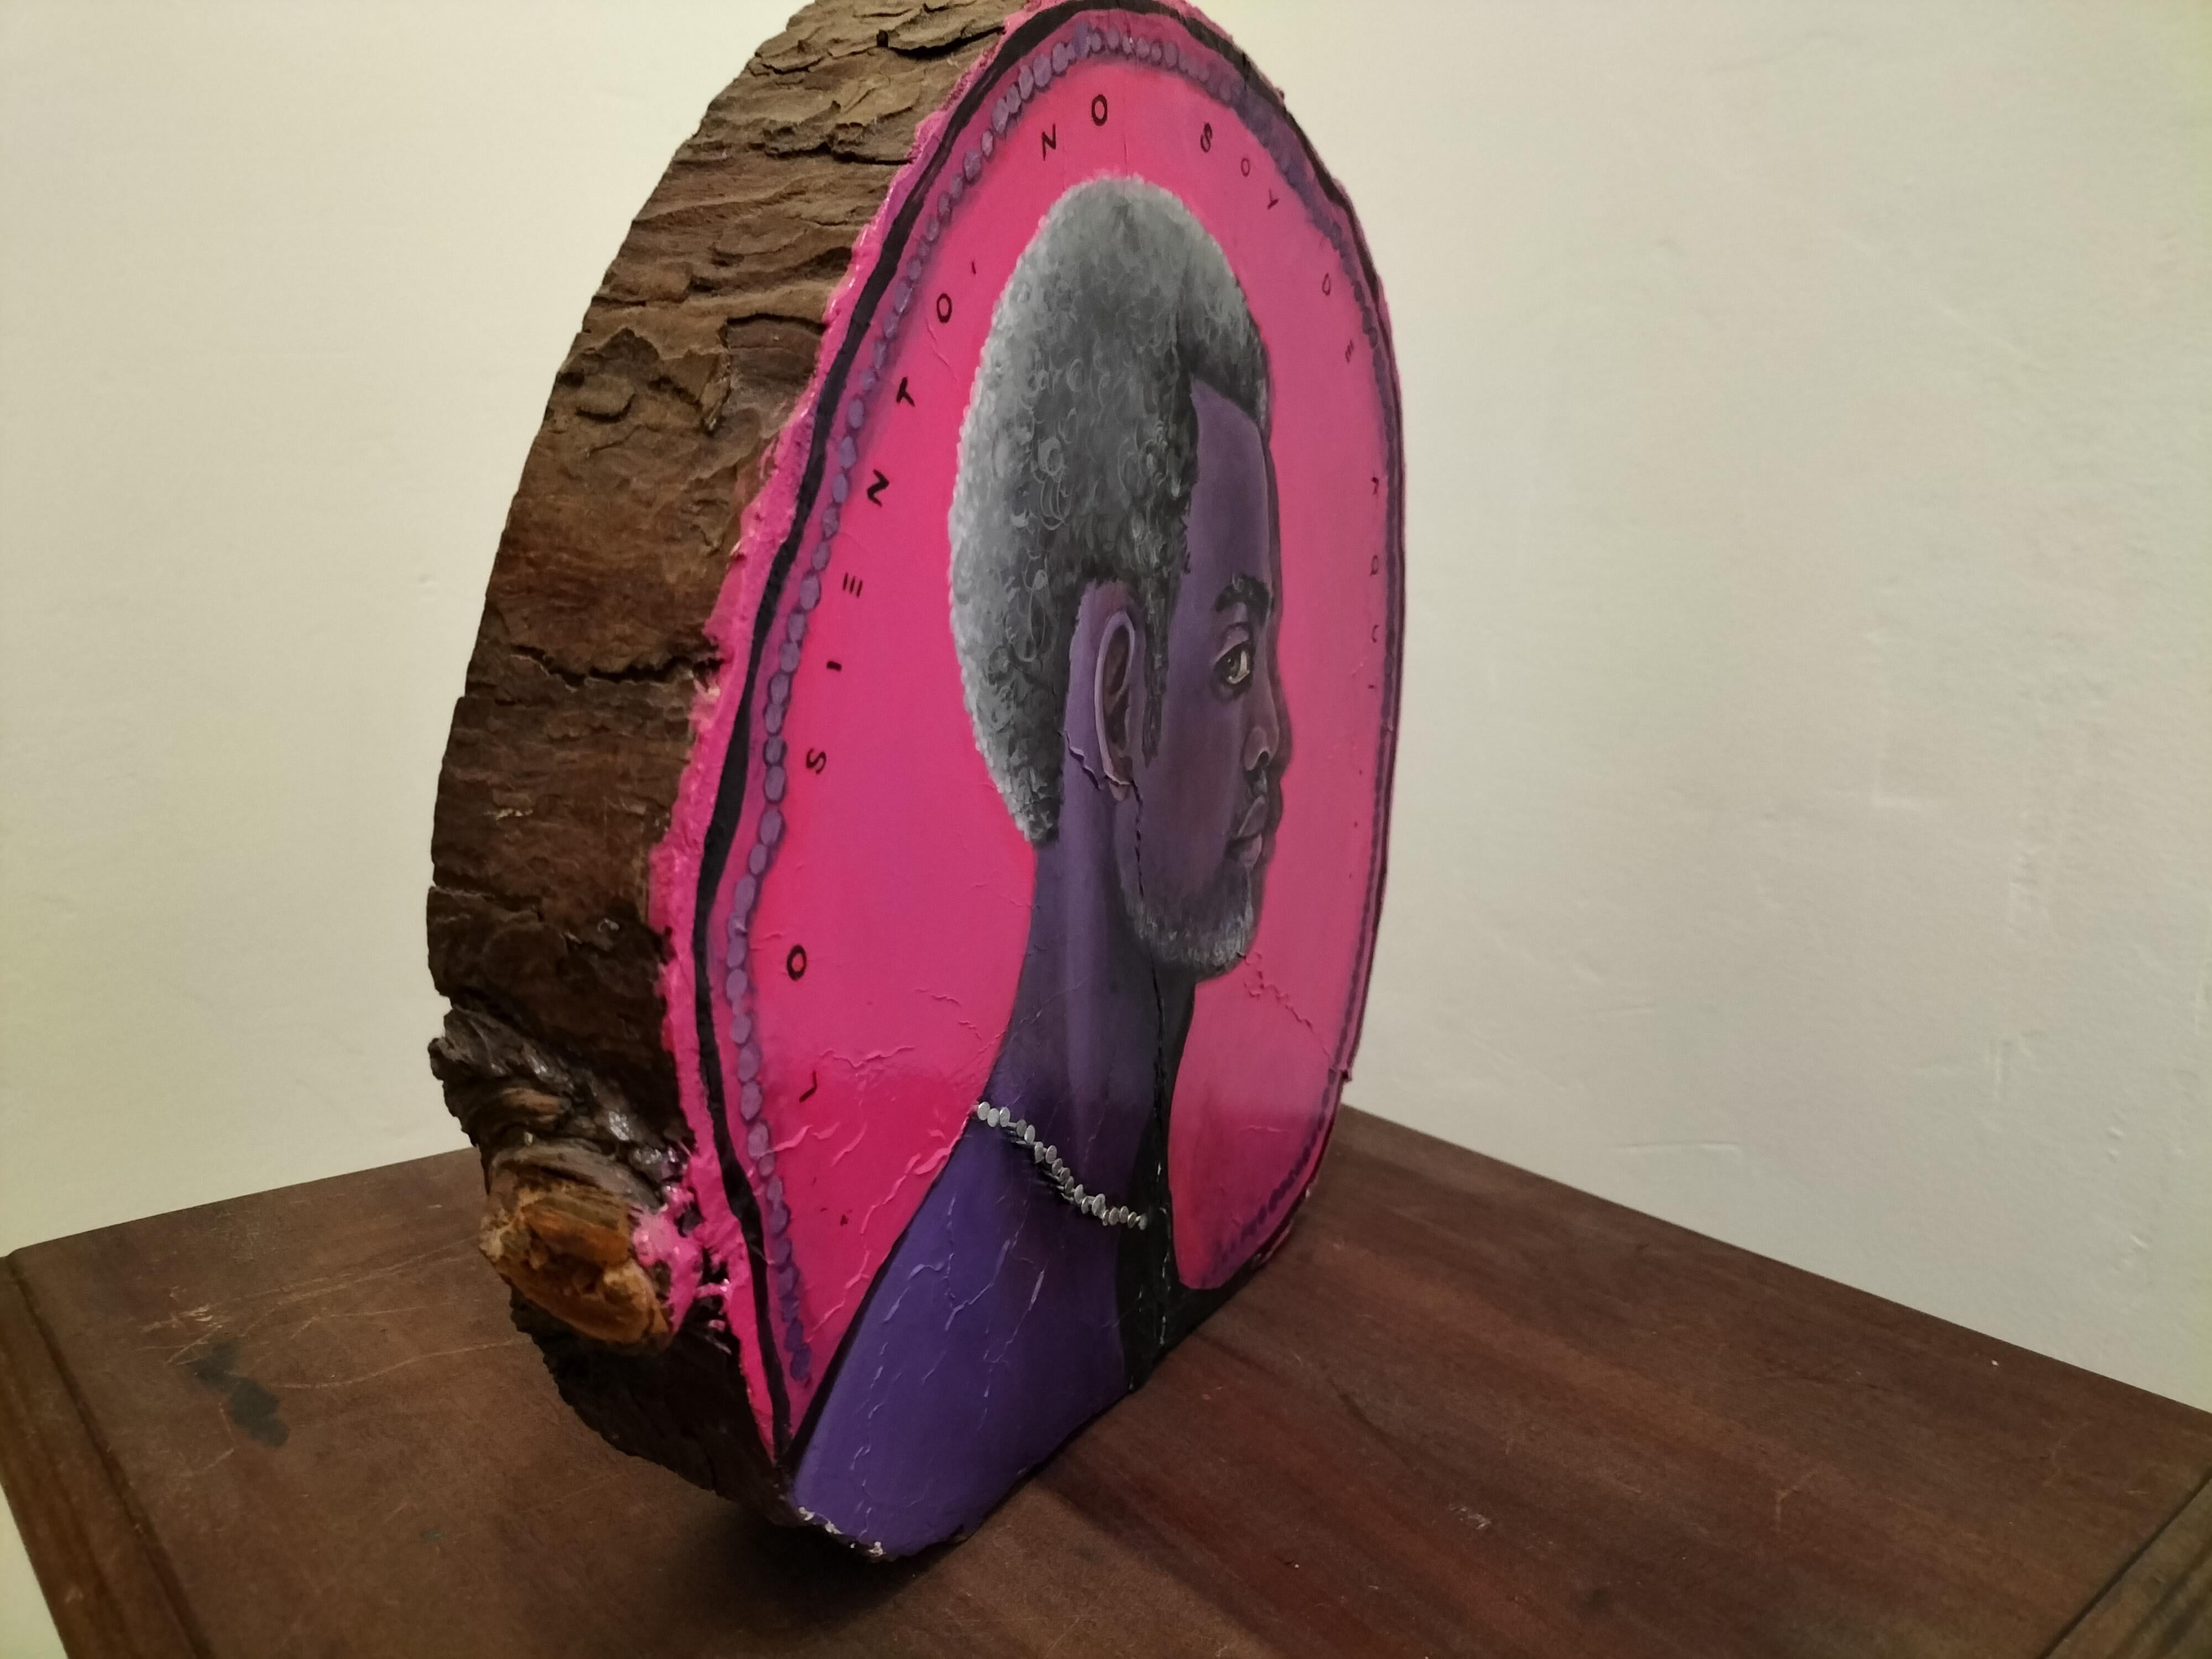 This sculptural and pictorial piece is designed to be displayed on a wall or directly on furniture or a pedestal. It is crafted on a thick cypress wood slice, properly treated for preservation, and features a profile portrait of a black man